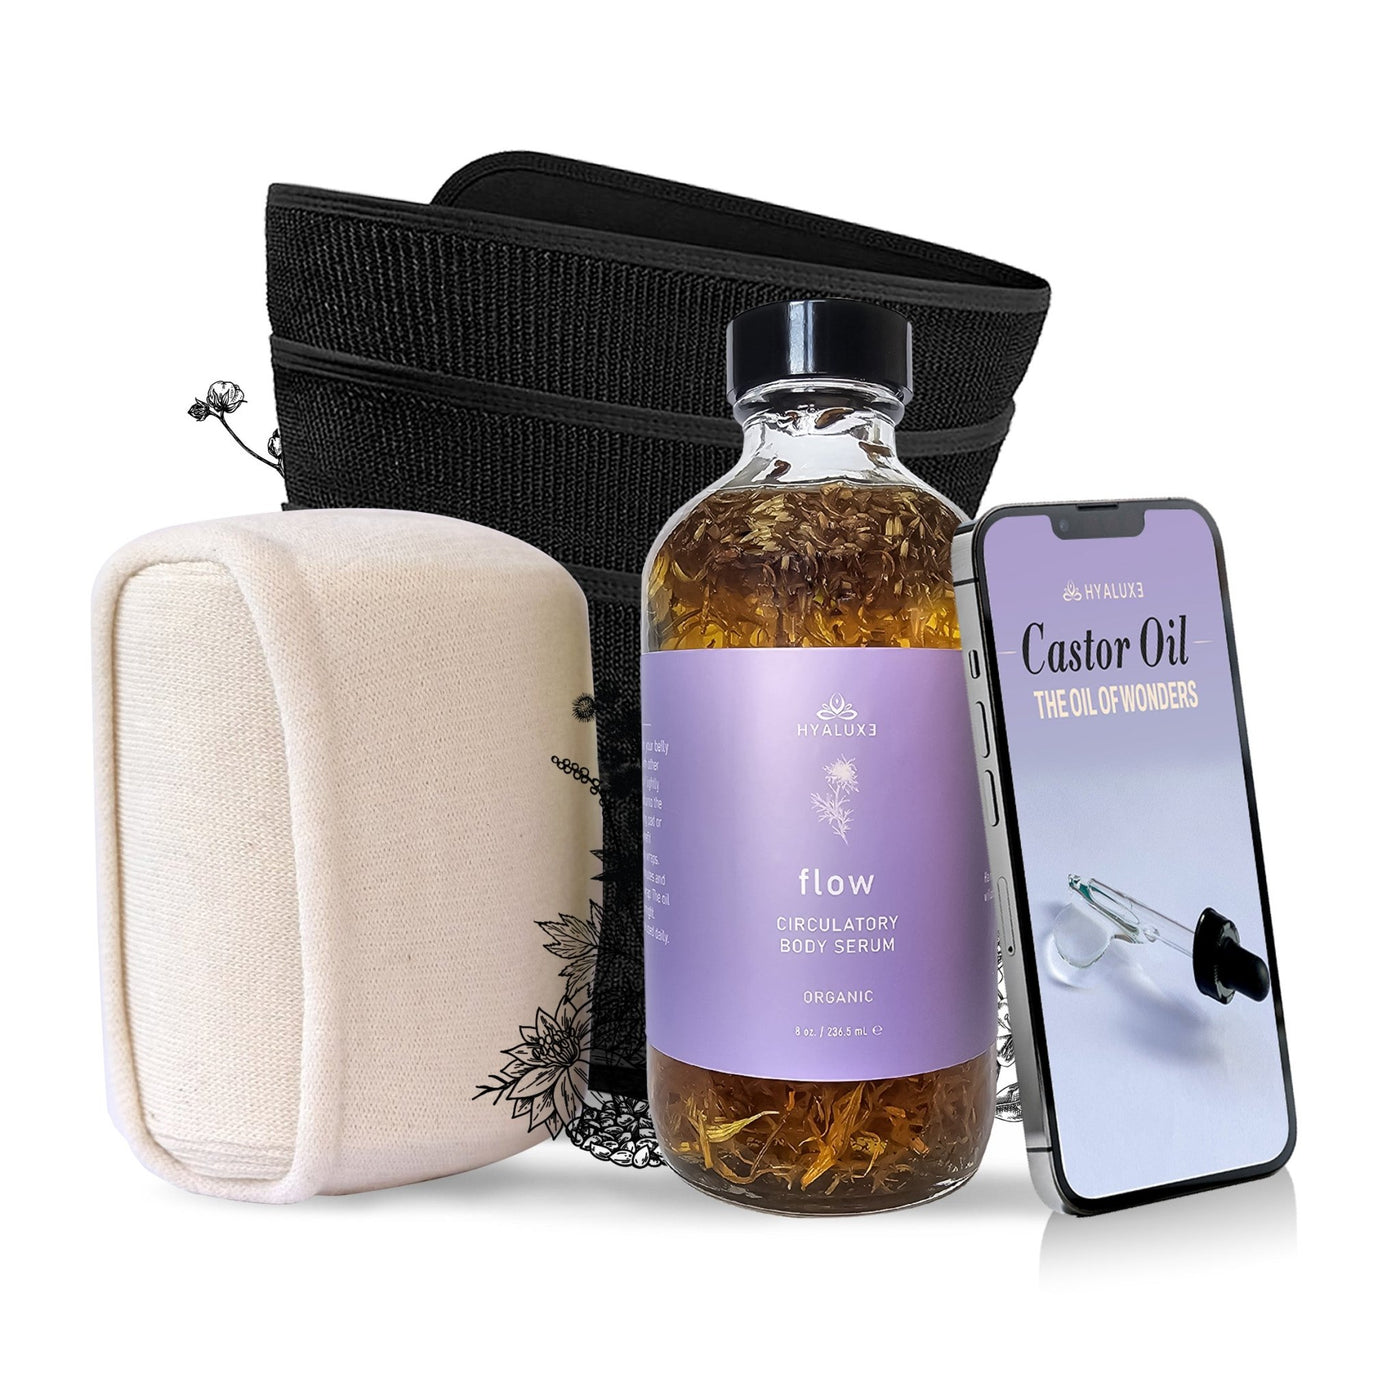 FLOW bundle with Cotton Wrap, Benefit Enhancement Wraps and Guide - Hyaluxe Body